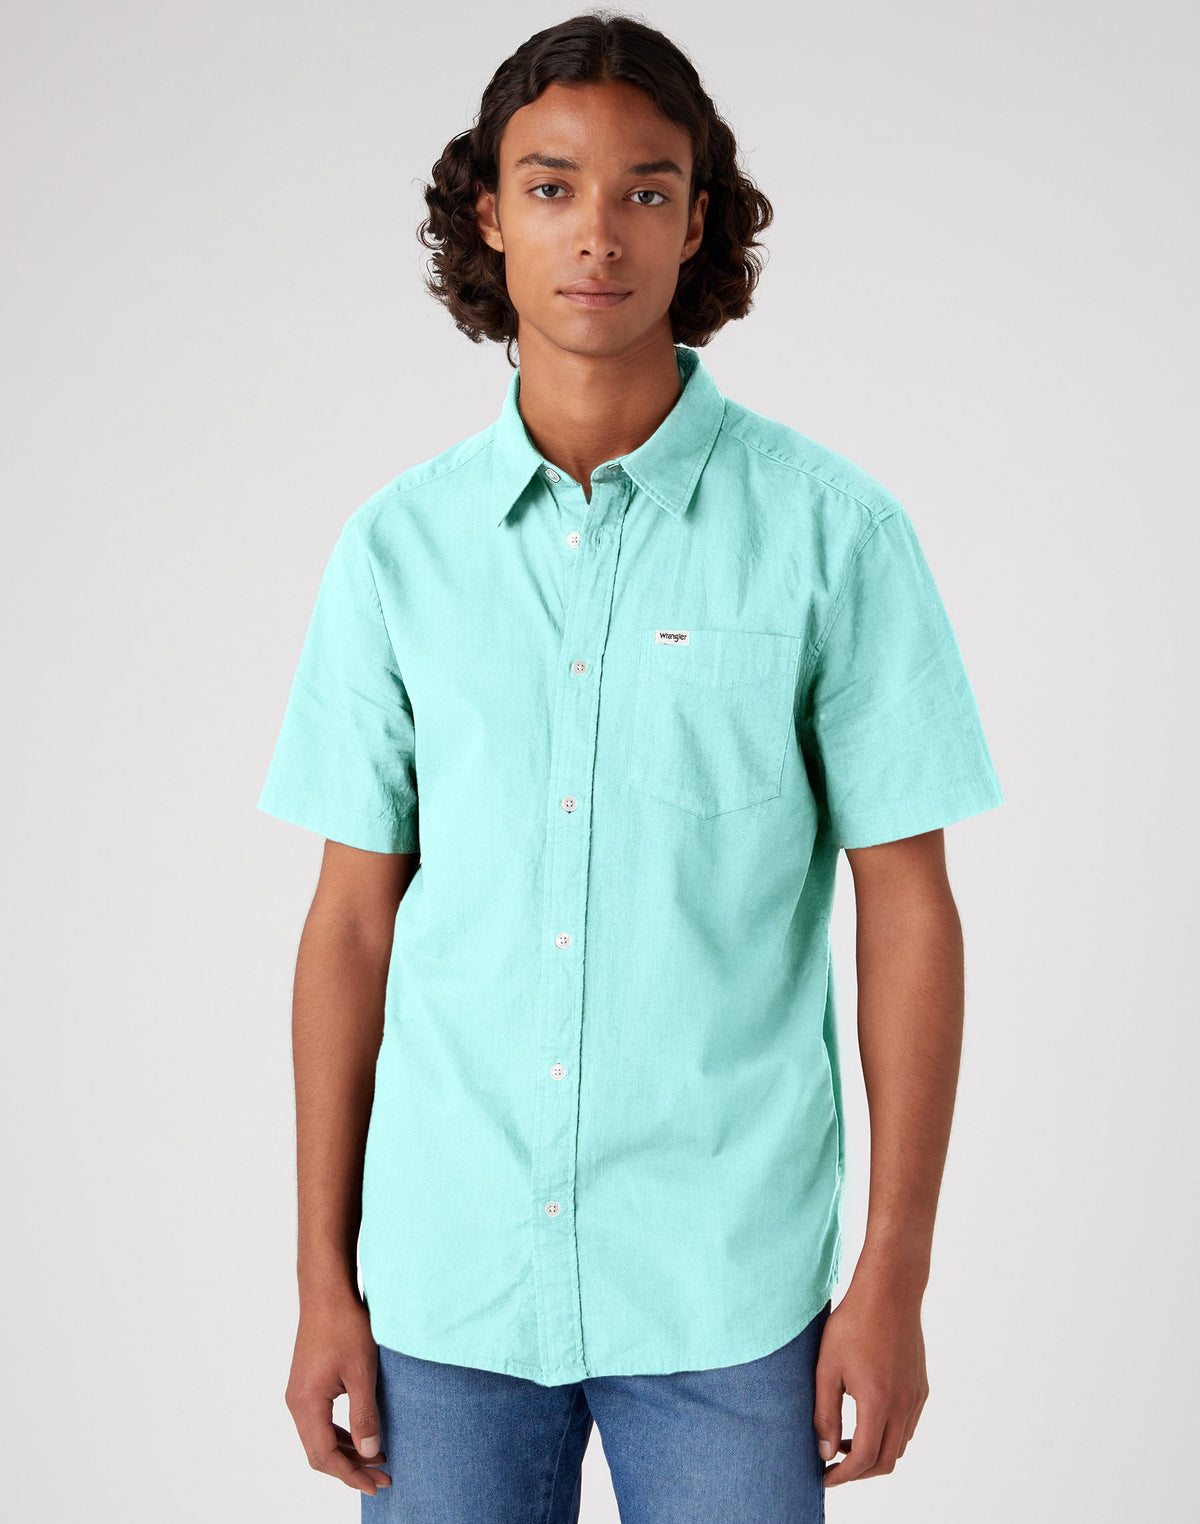 Short Sleeve One Pocket Shirt in Canal Blue